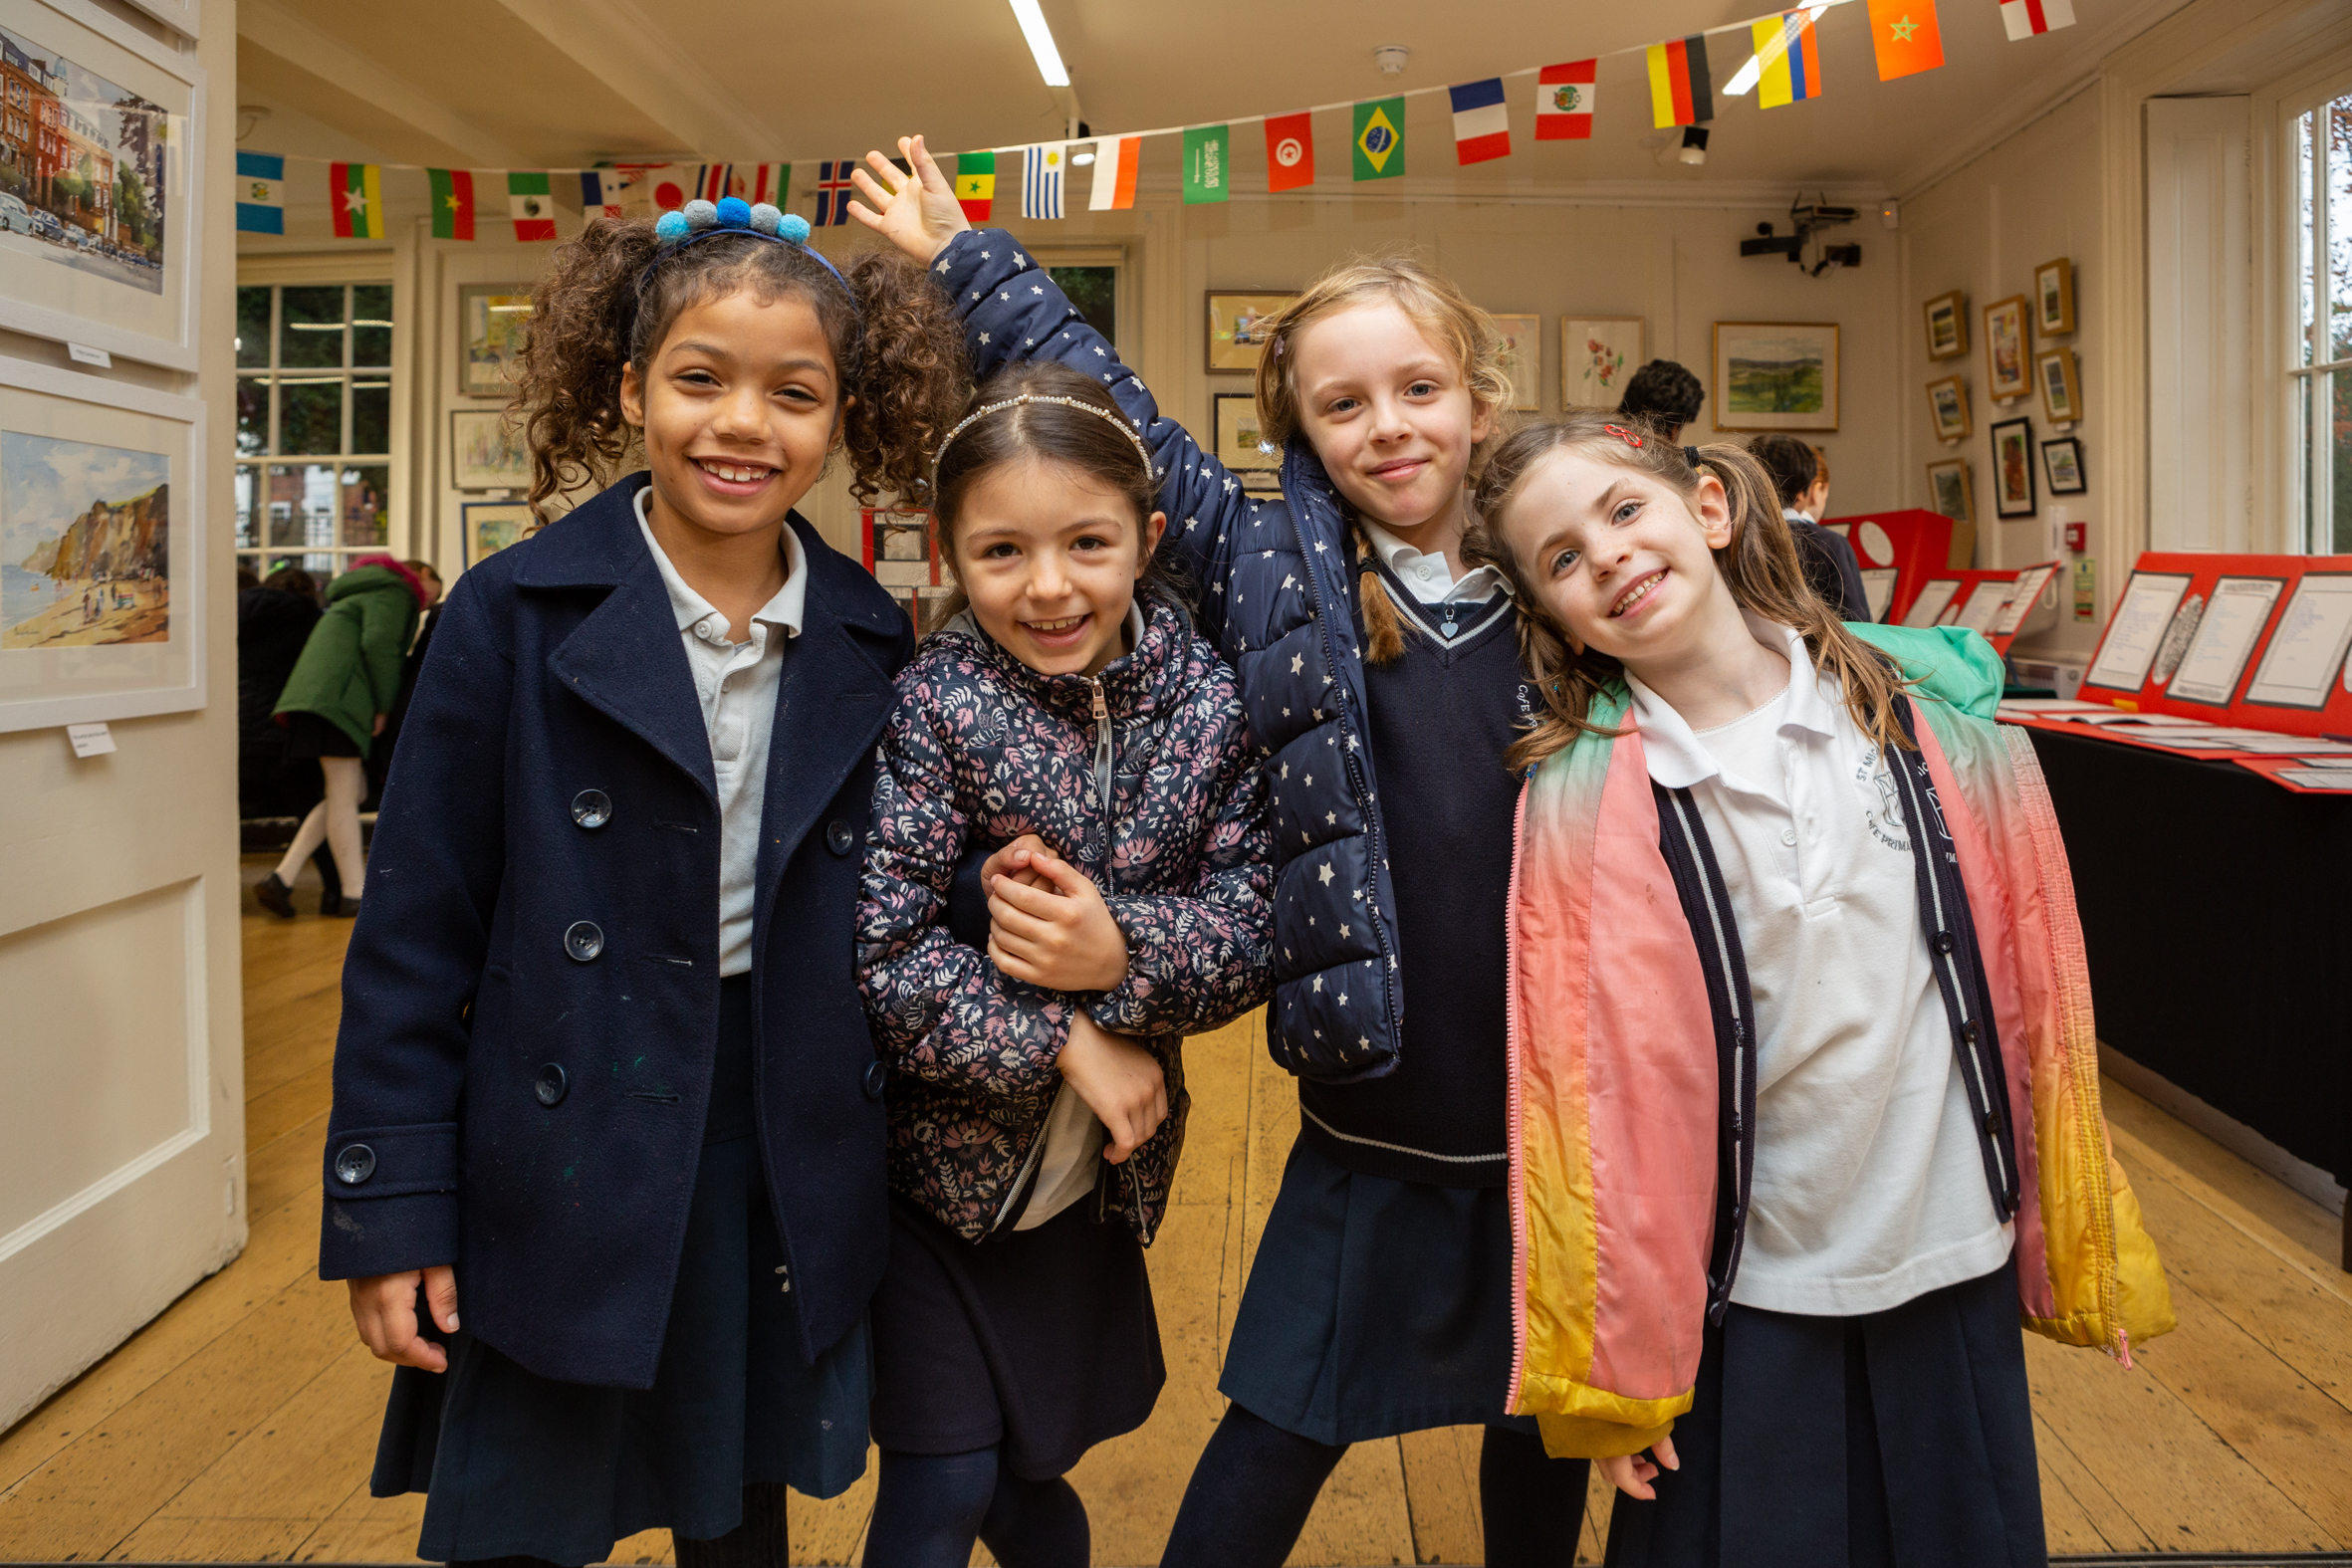 Four schoolgirls posing for a photograph in a gallery at Lauderdale House during Takeover Day.